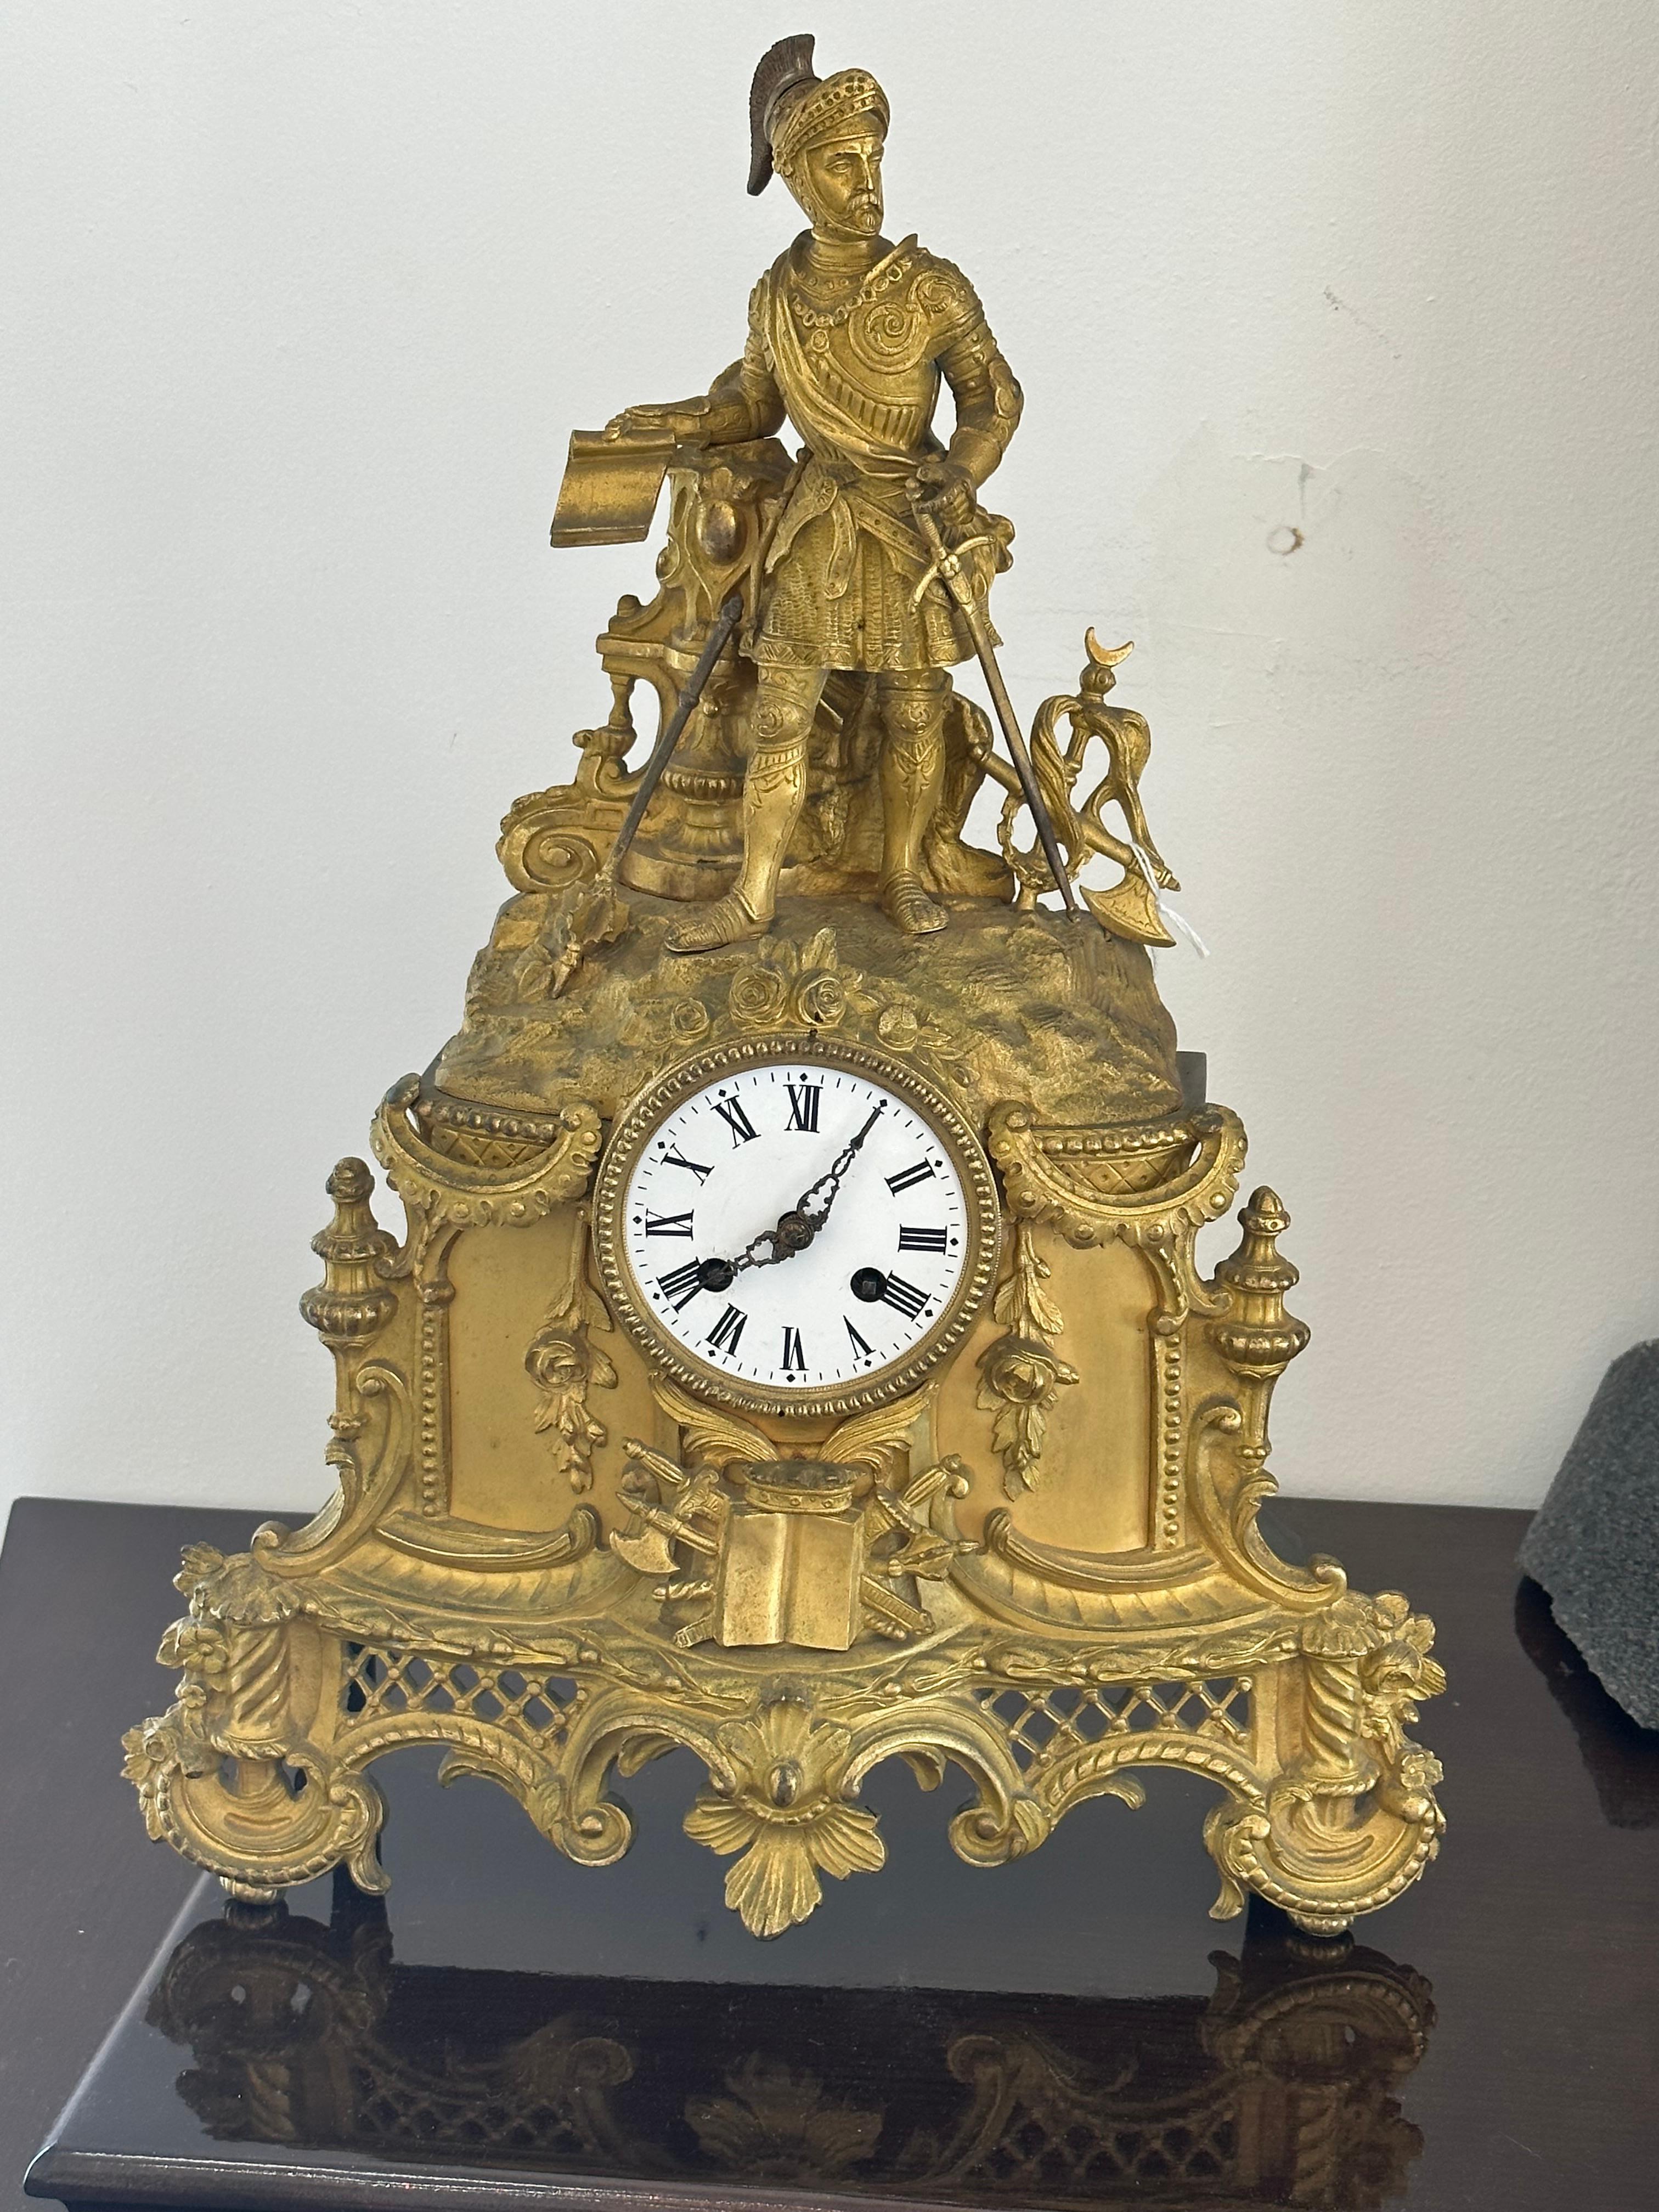 Incredible Louis XVI Bronze clock circa 1840, machine stamped Shaw Paris, this is an original piece of the period, depicting a standing warrior.